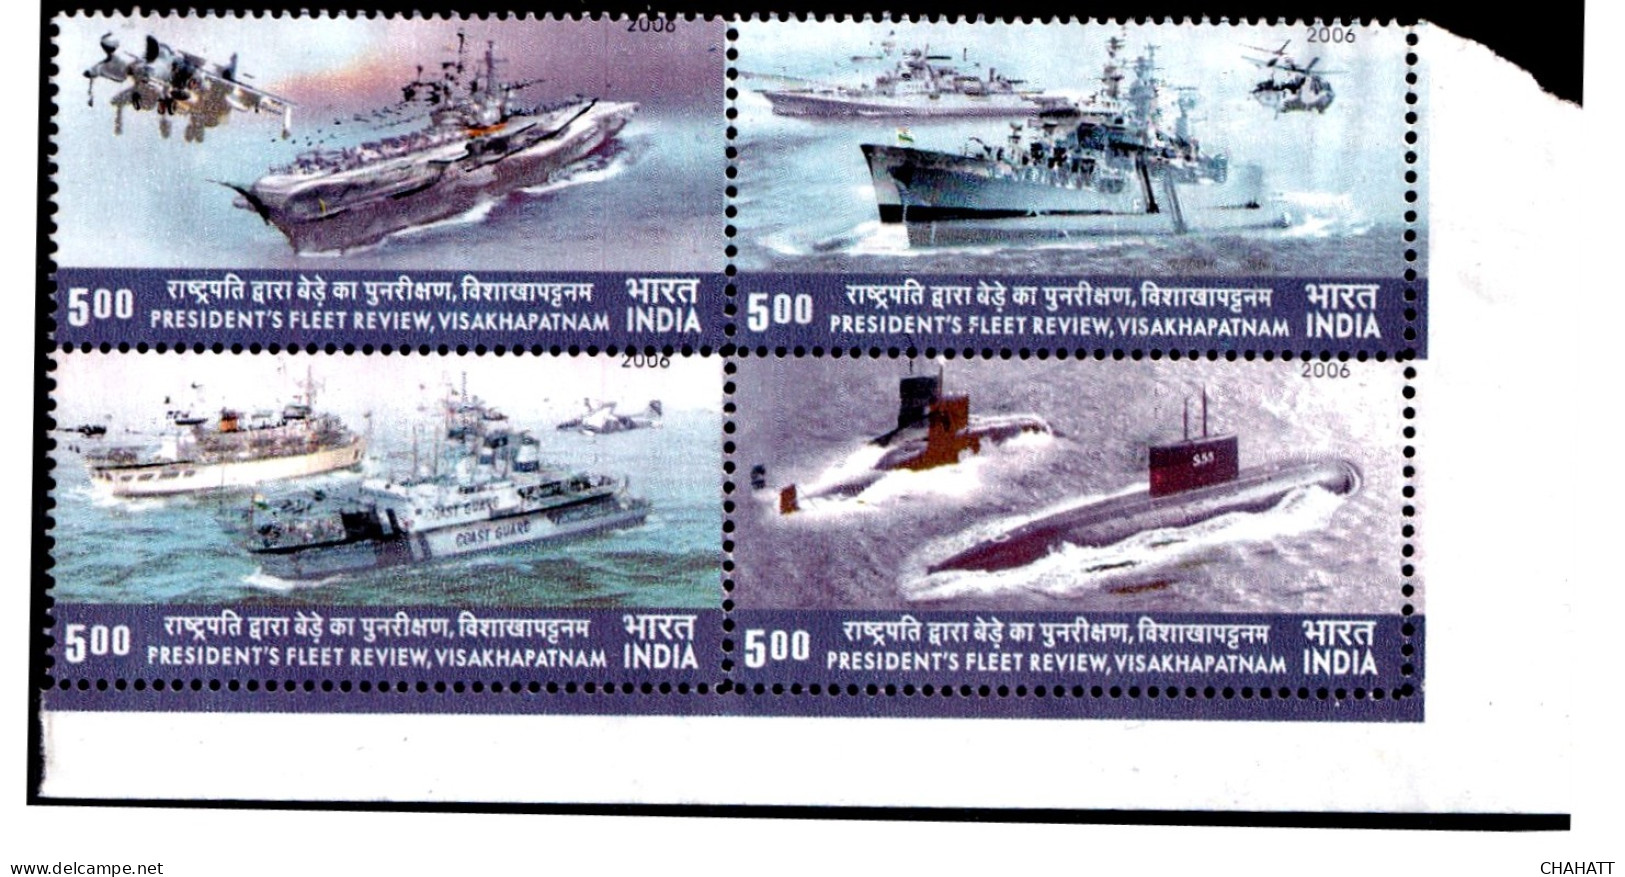 INDIA-2006- PRESIDENT'S FLEET REVIEW- ERROR- HELICOPTERS- NAVAL SHIPS-GHOST IMAGES- SETENANT BLK OF 4-MNH-IE-47 - Variedades Y Curiosidades